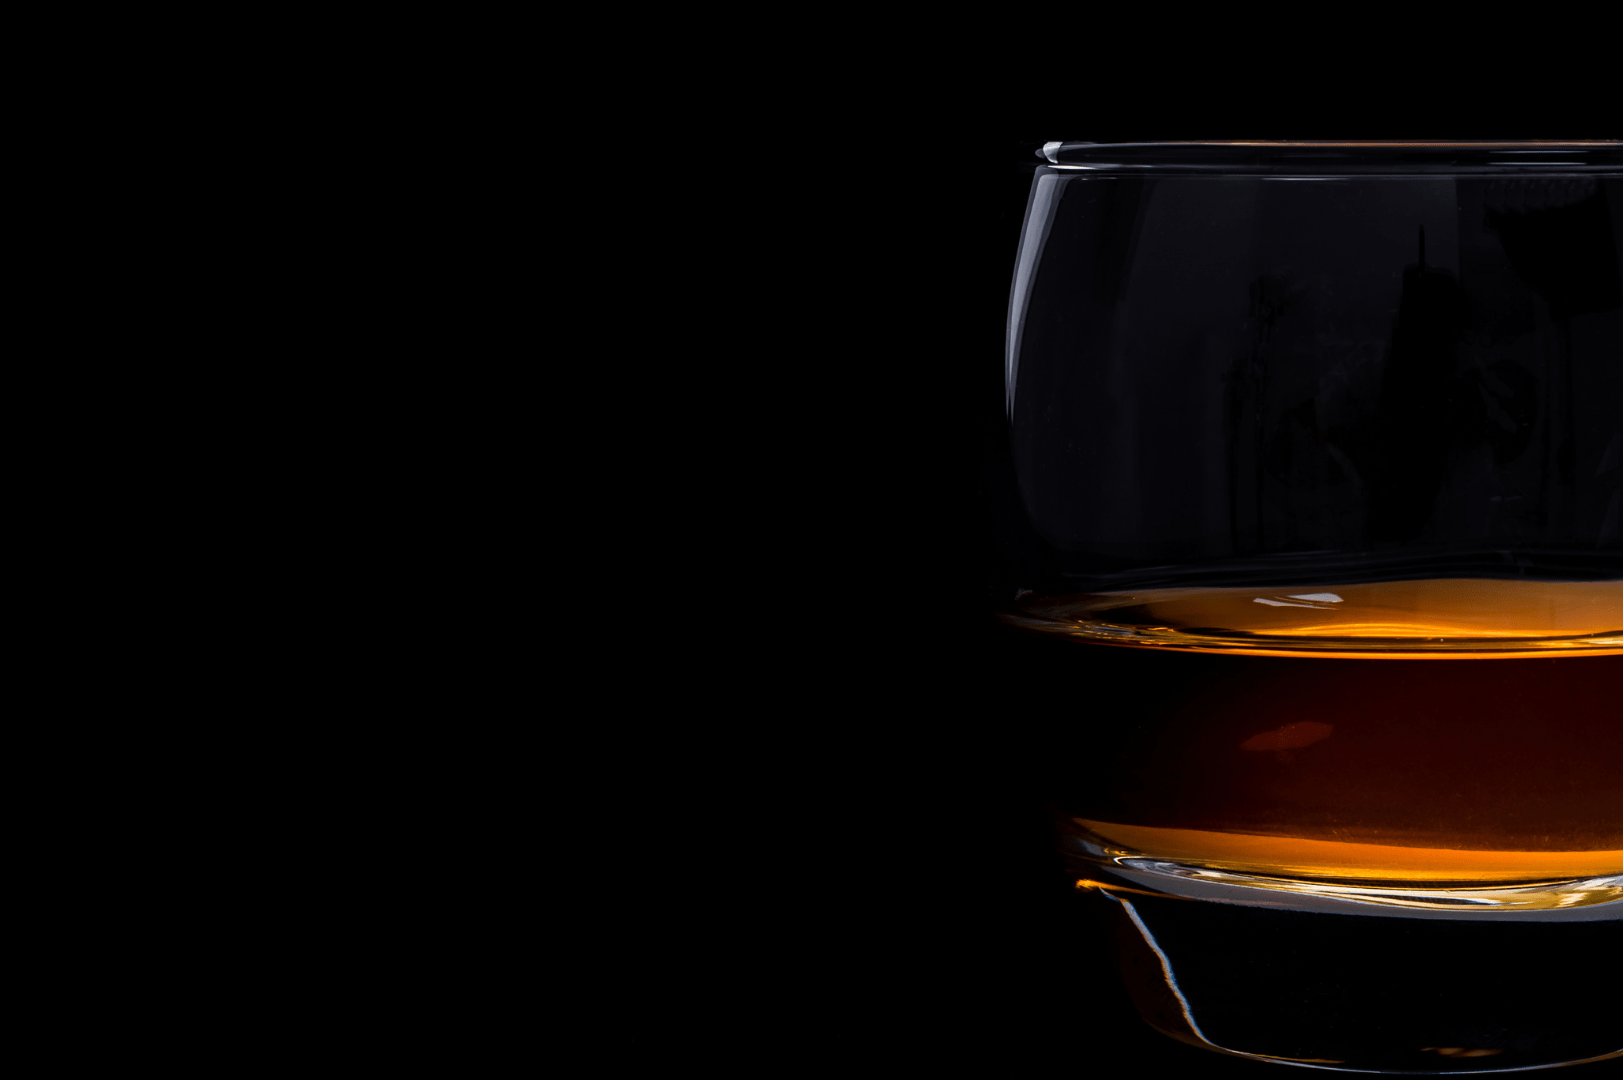 Bloomberg TV: Whisky Is Fast Becoming ‘Liquid Gold’, Rare Finds Worldwide Says